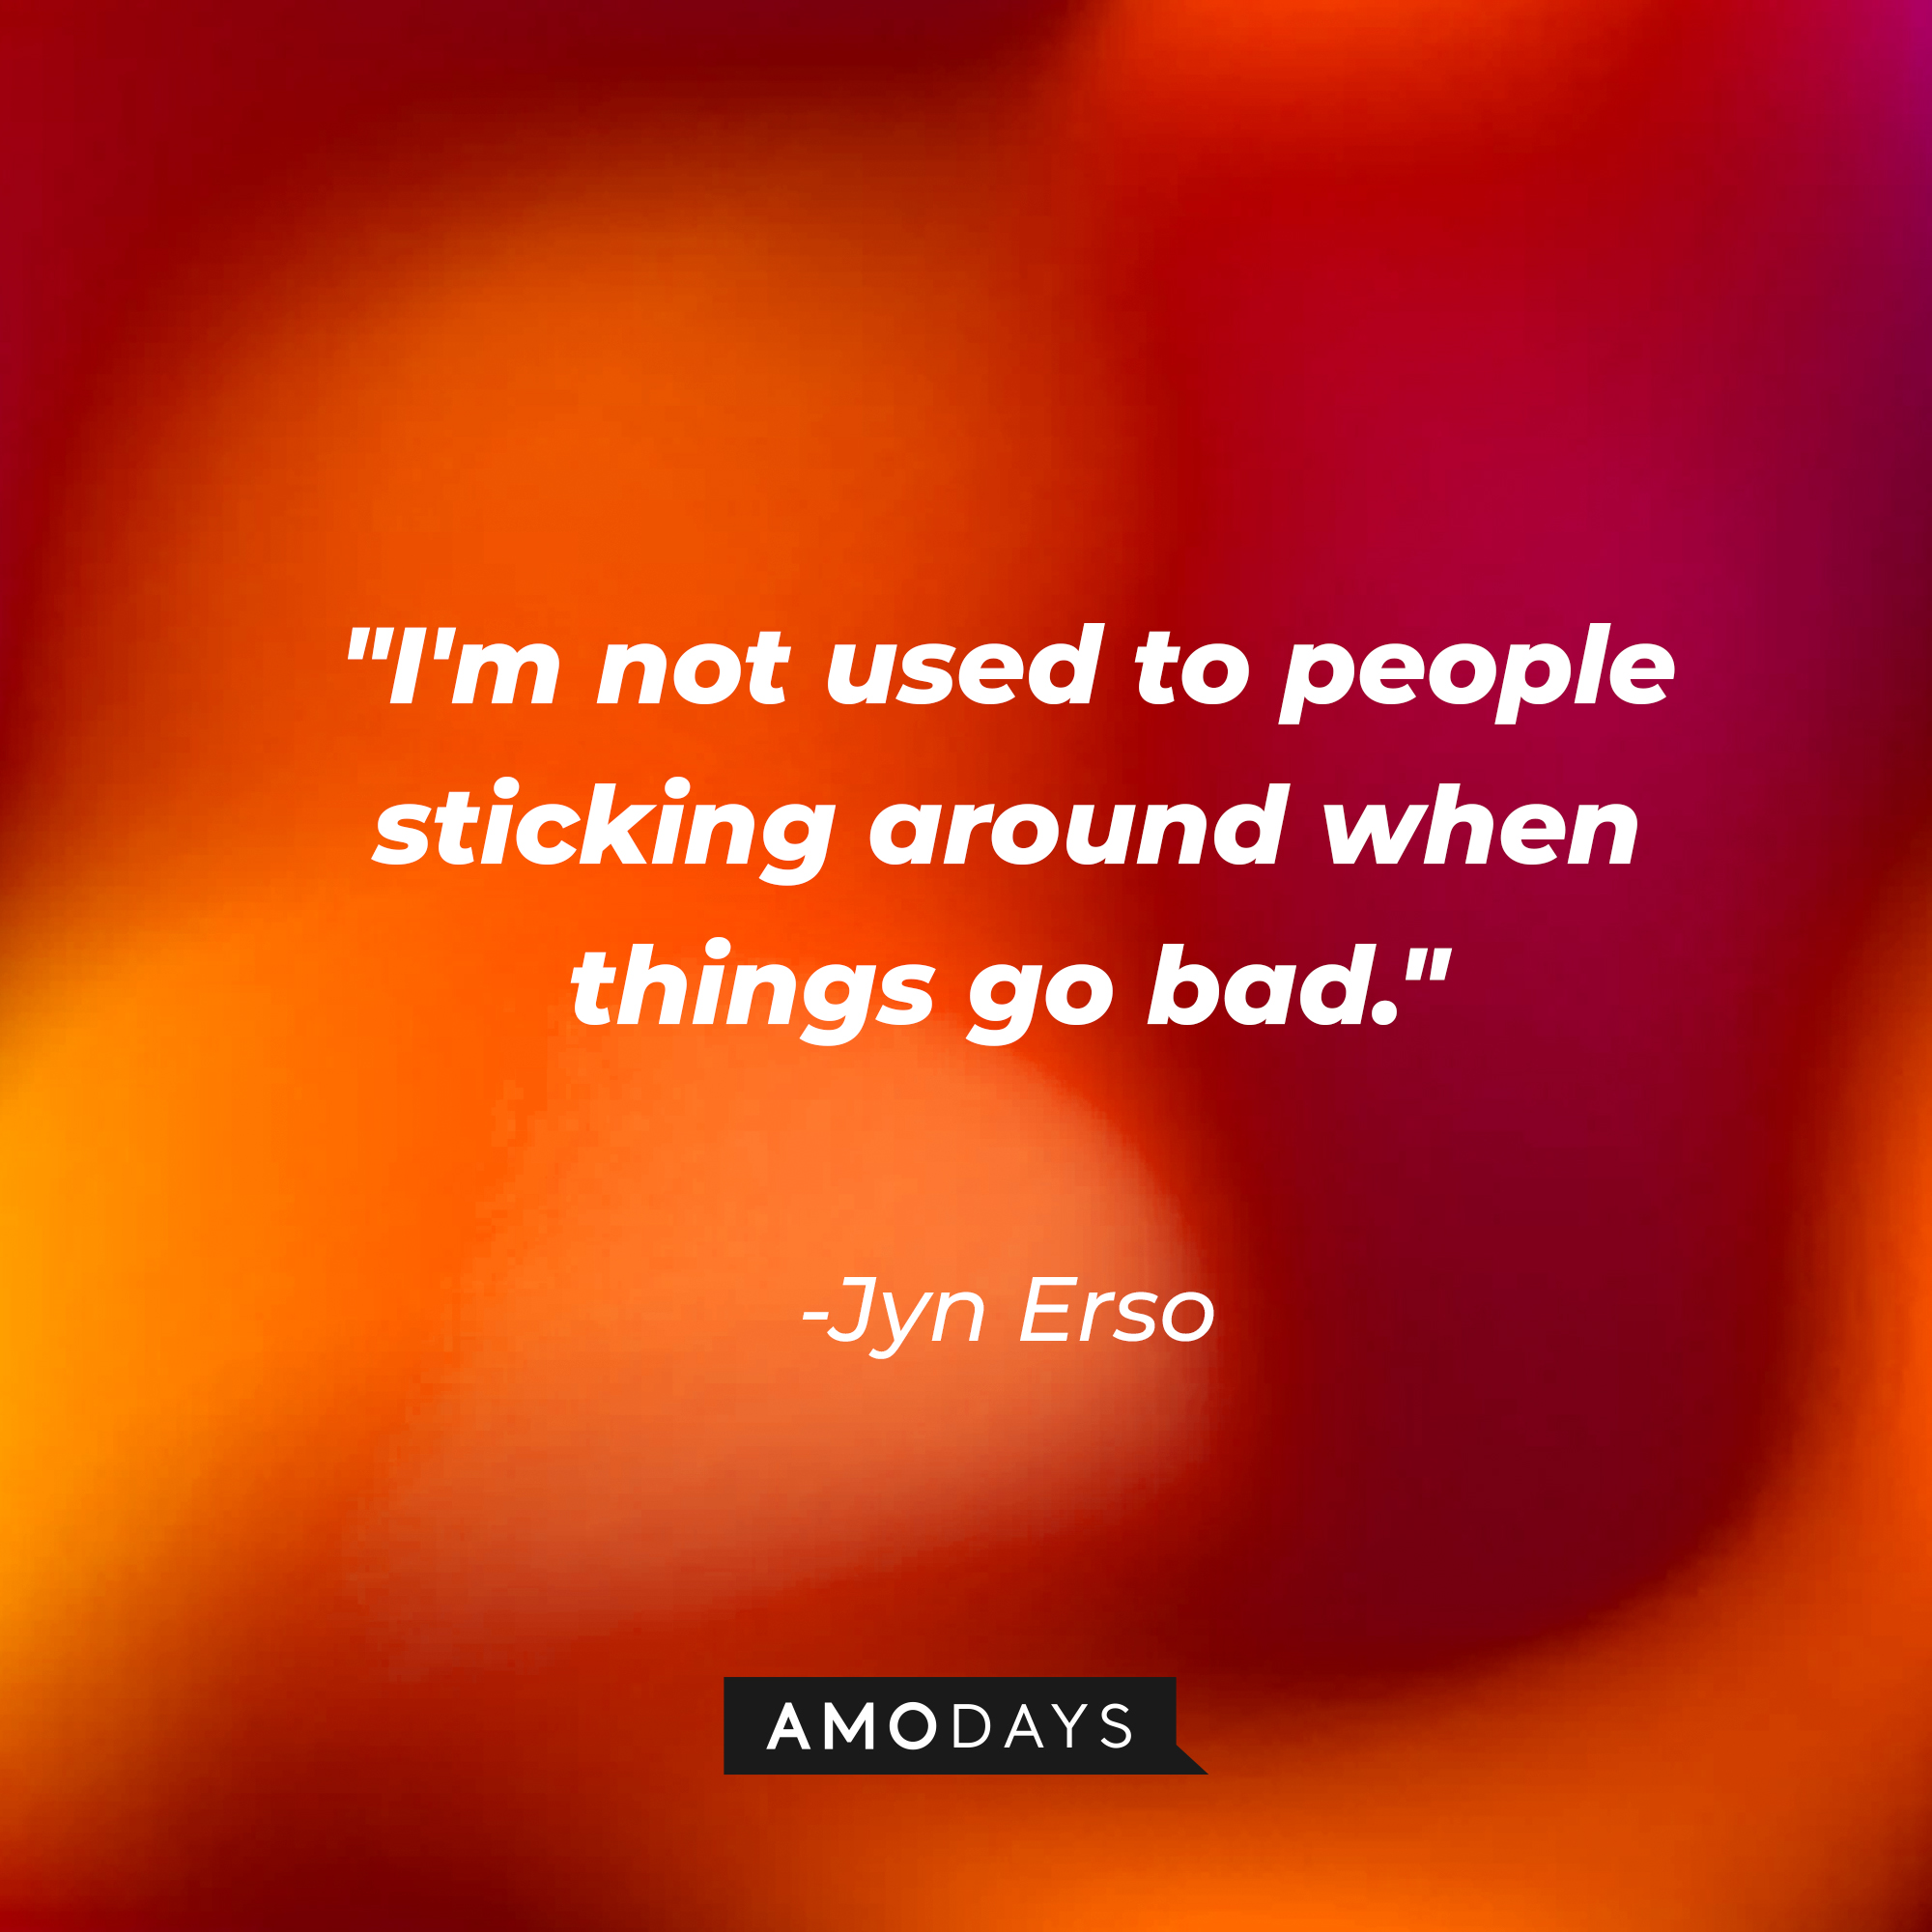 Jyn Erso's quote: “I'm not used to people sticking around when things go bad.” | Source: Amodays